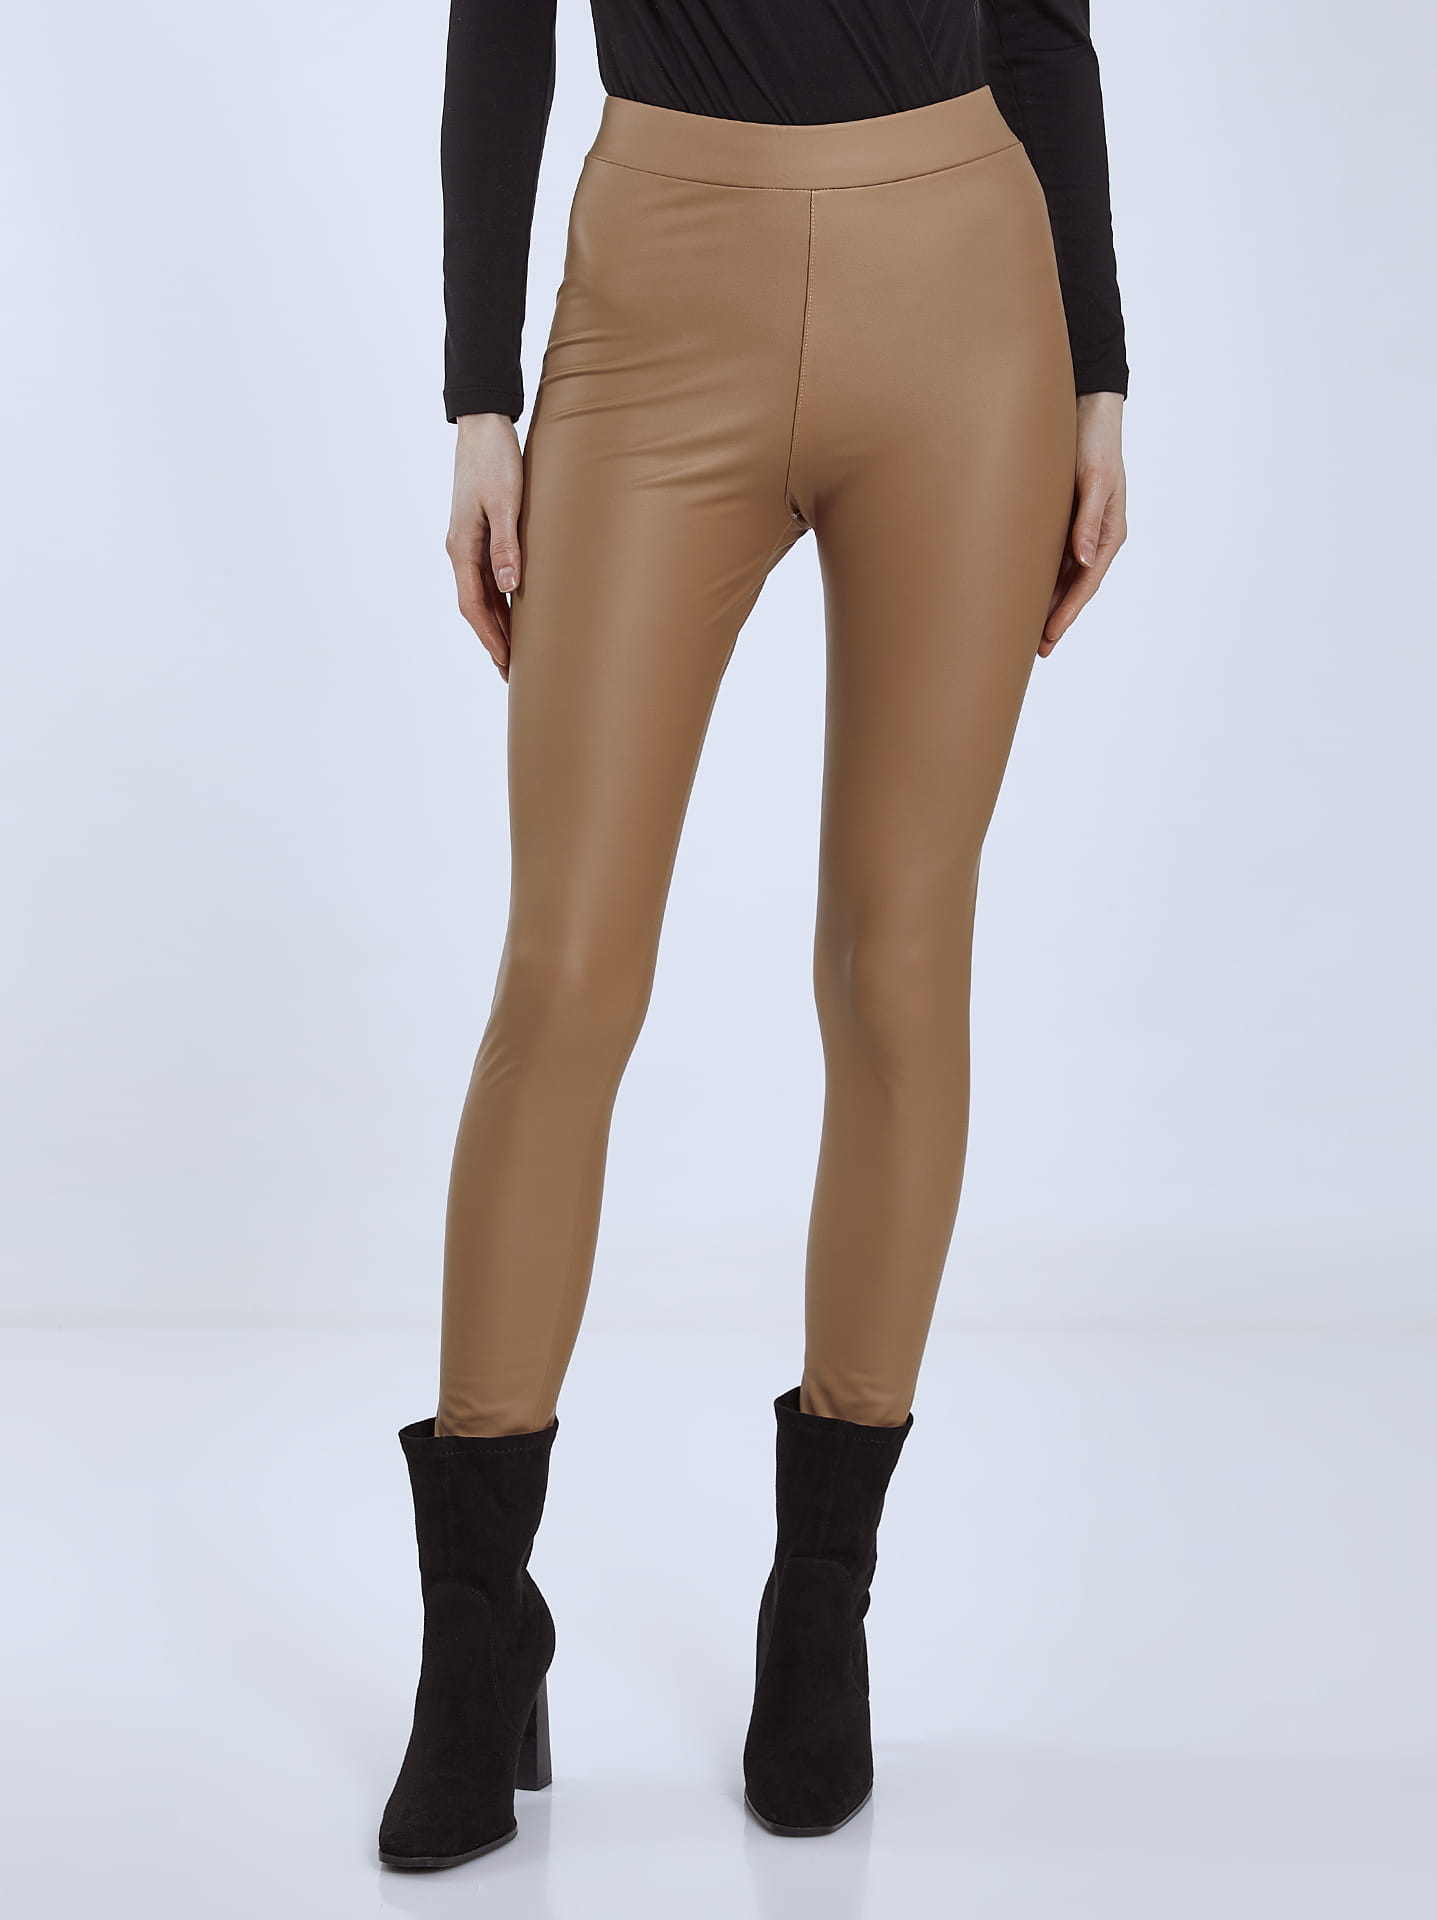 Leather effect leggings with fleece lining in camel, 8.99€